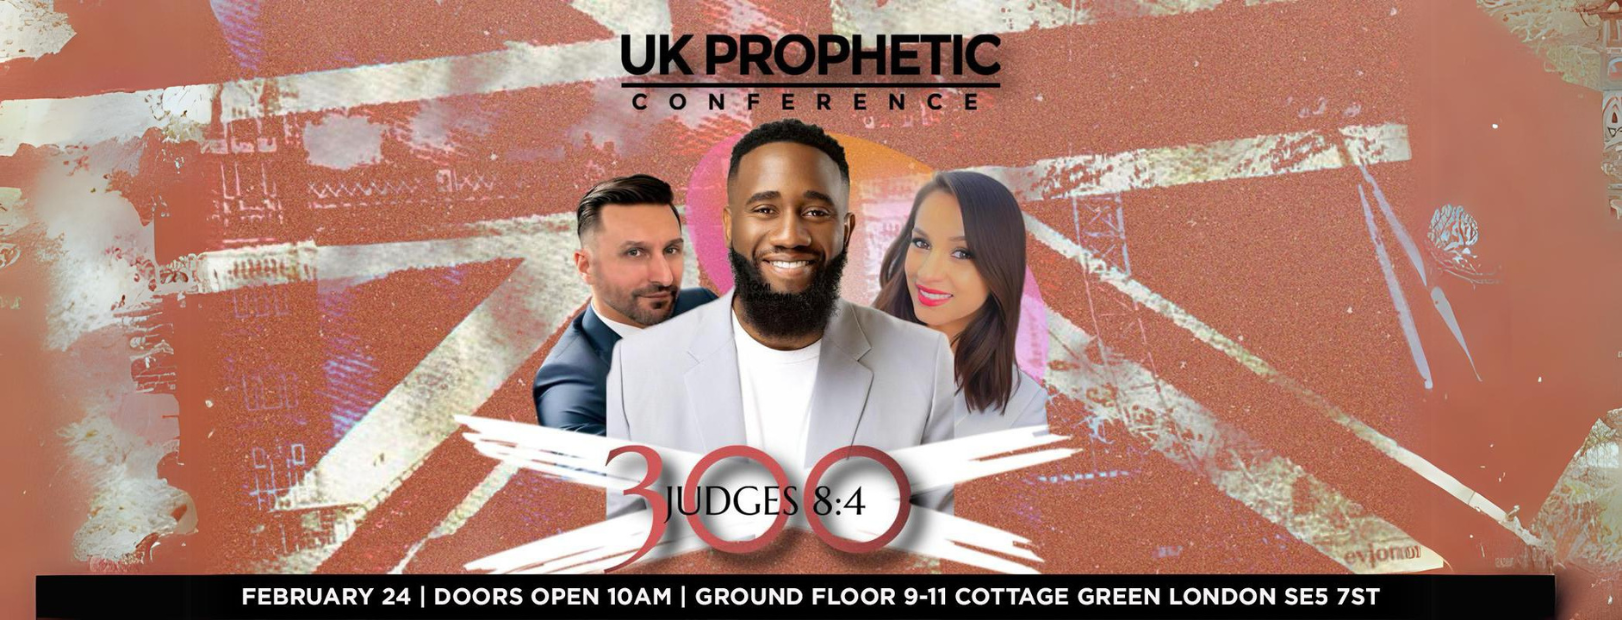 UK Prophetic Conference